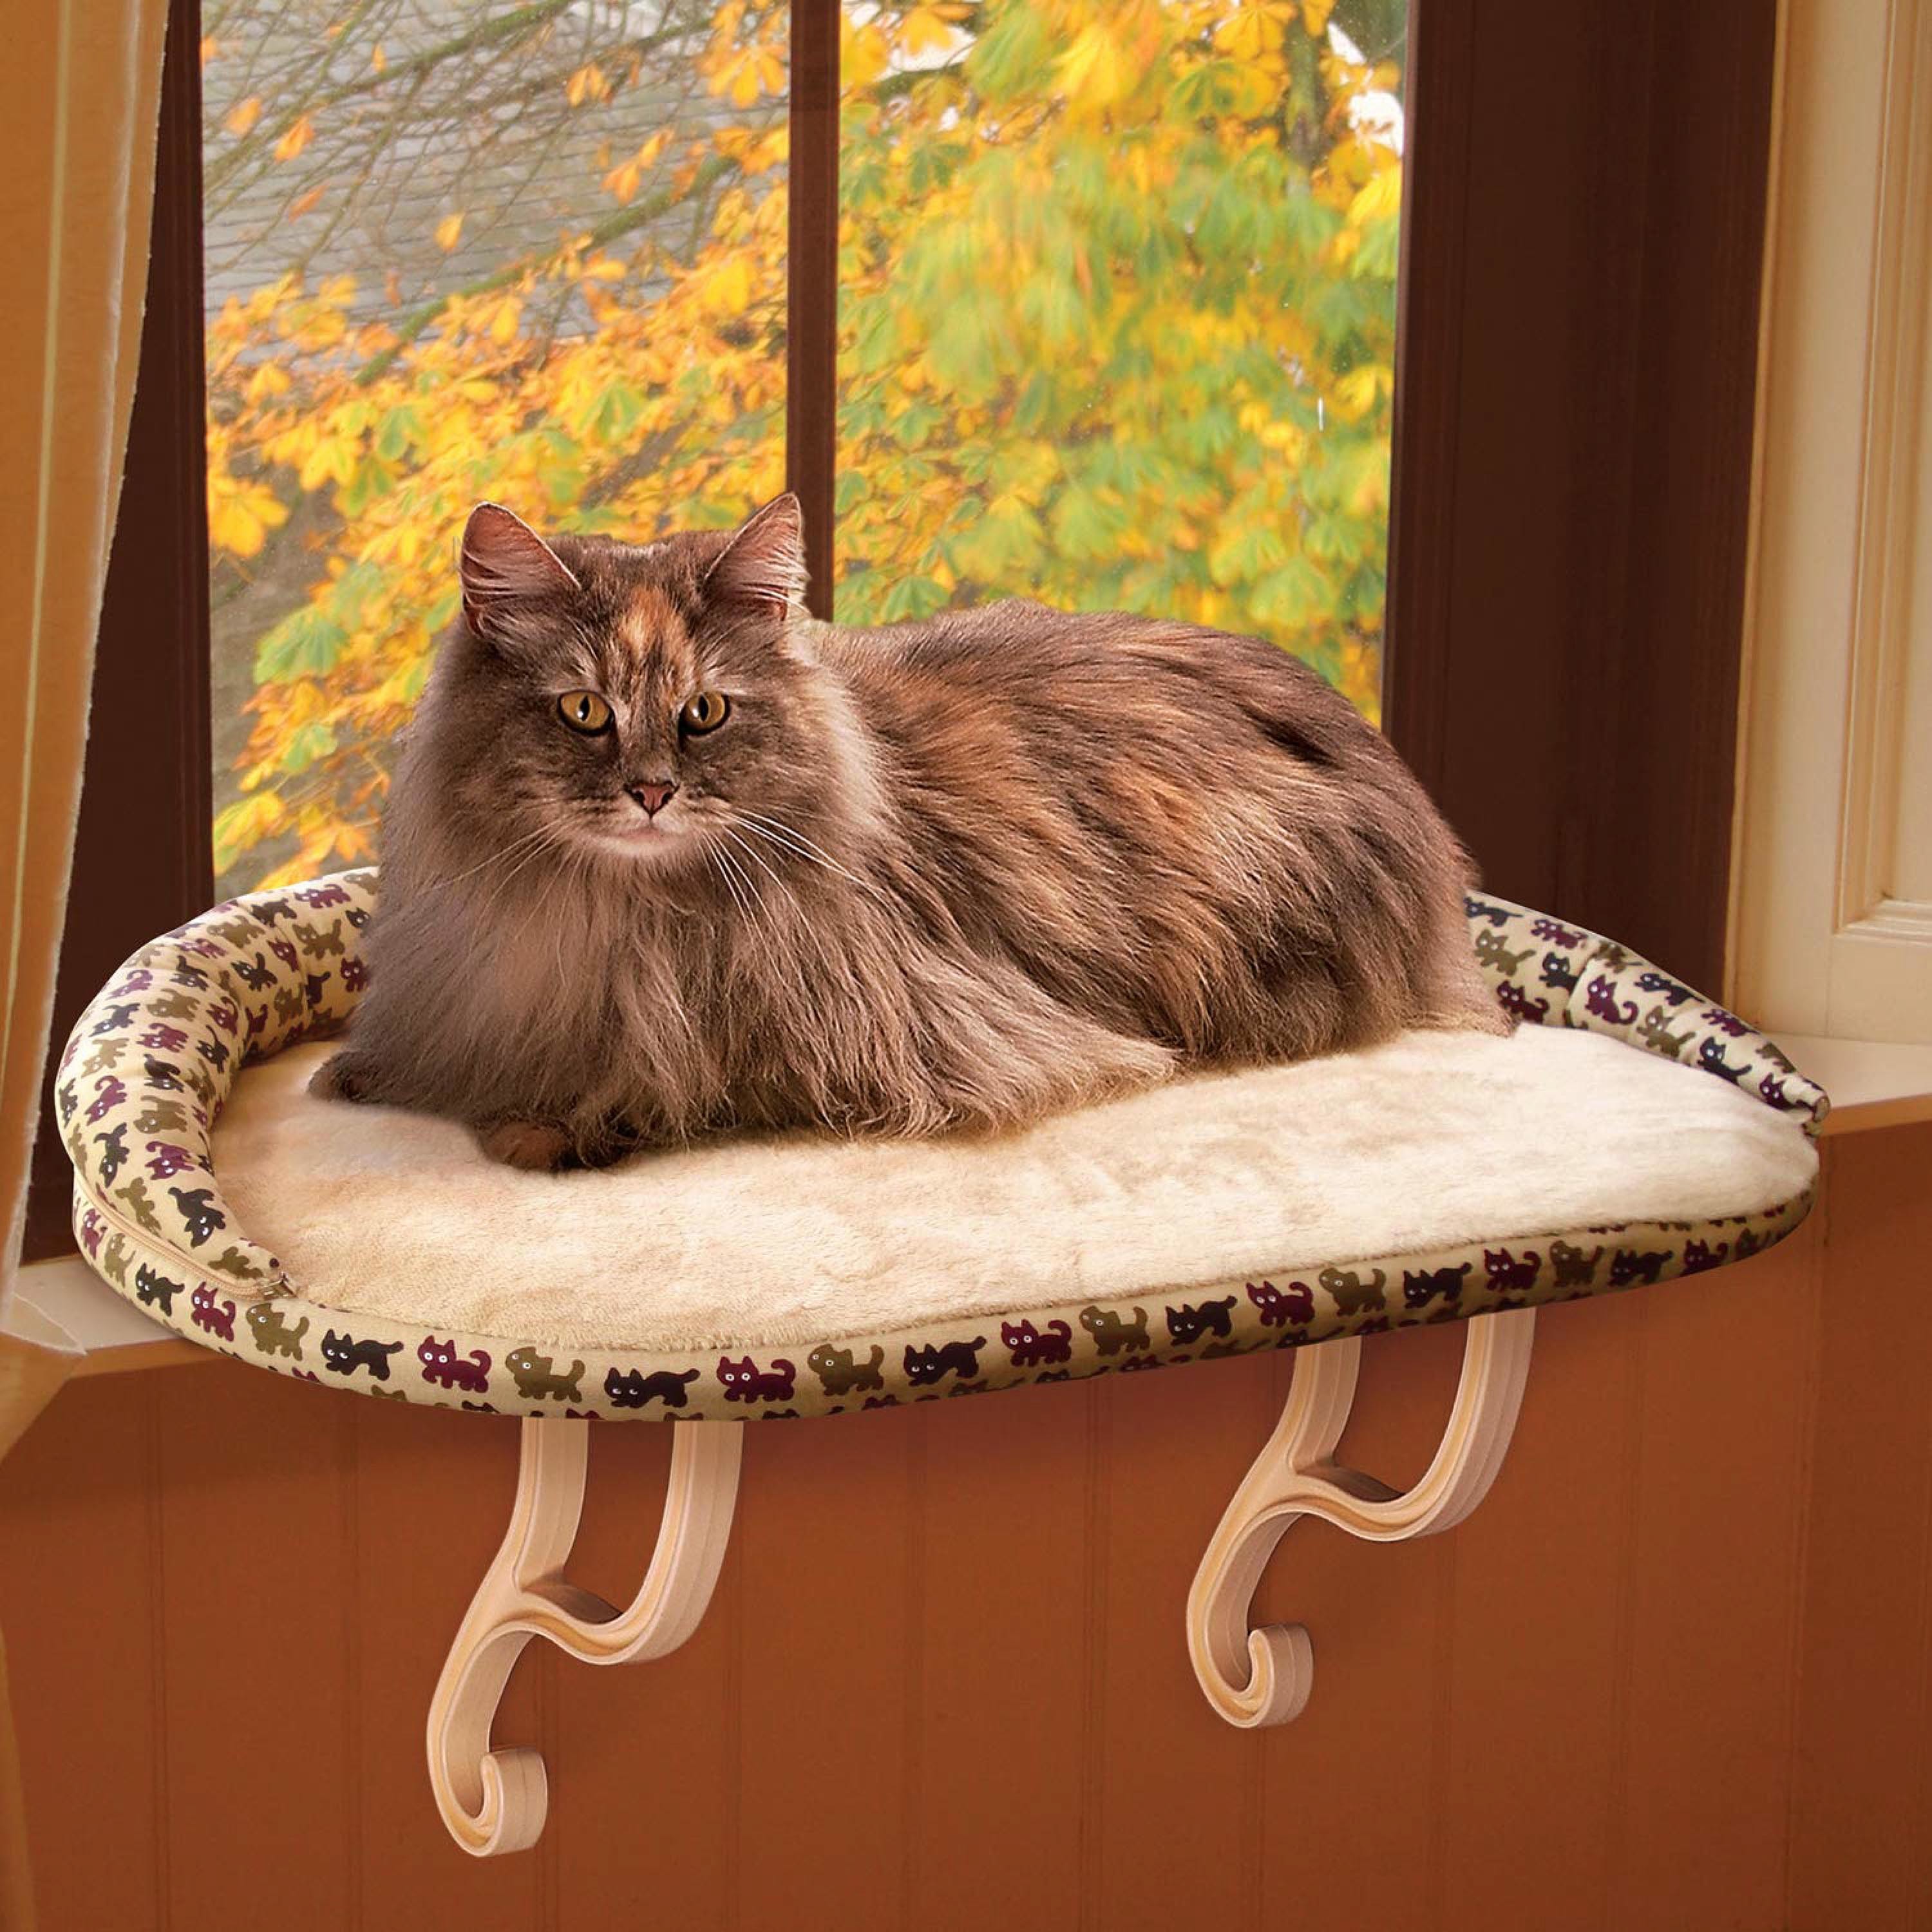 K&H Pet Products Deluxe Kitty Sill with Removable Bolster Tan/Kitty Print 14 X 24 Inches - image 1 of 10